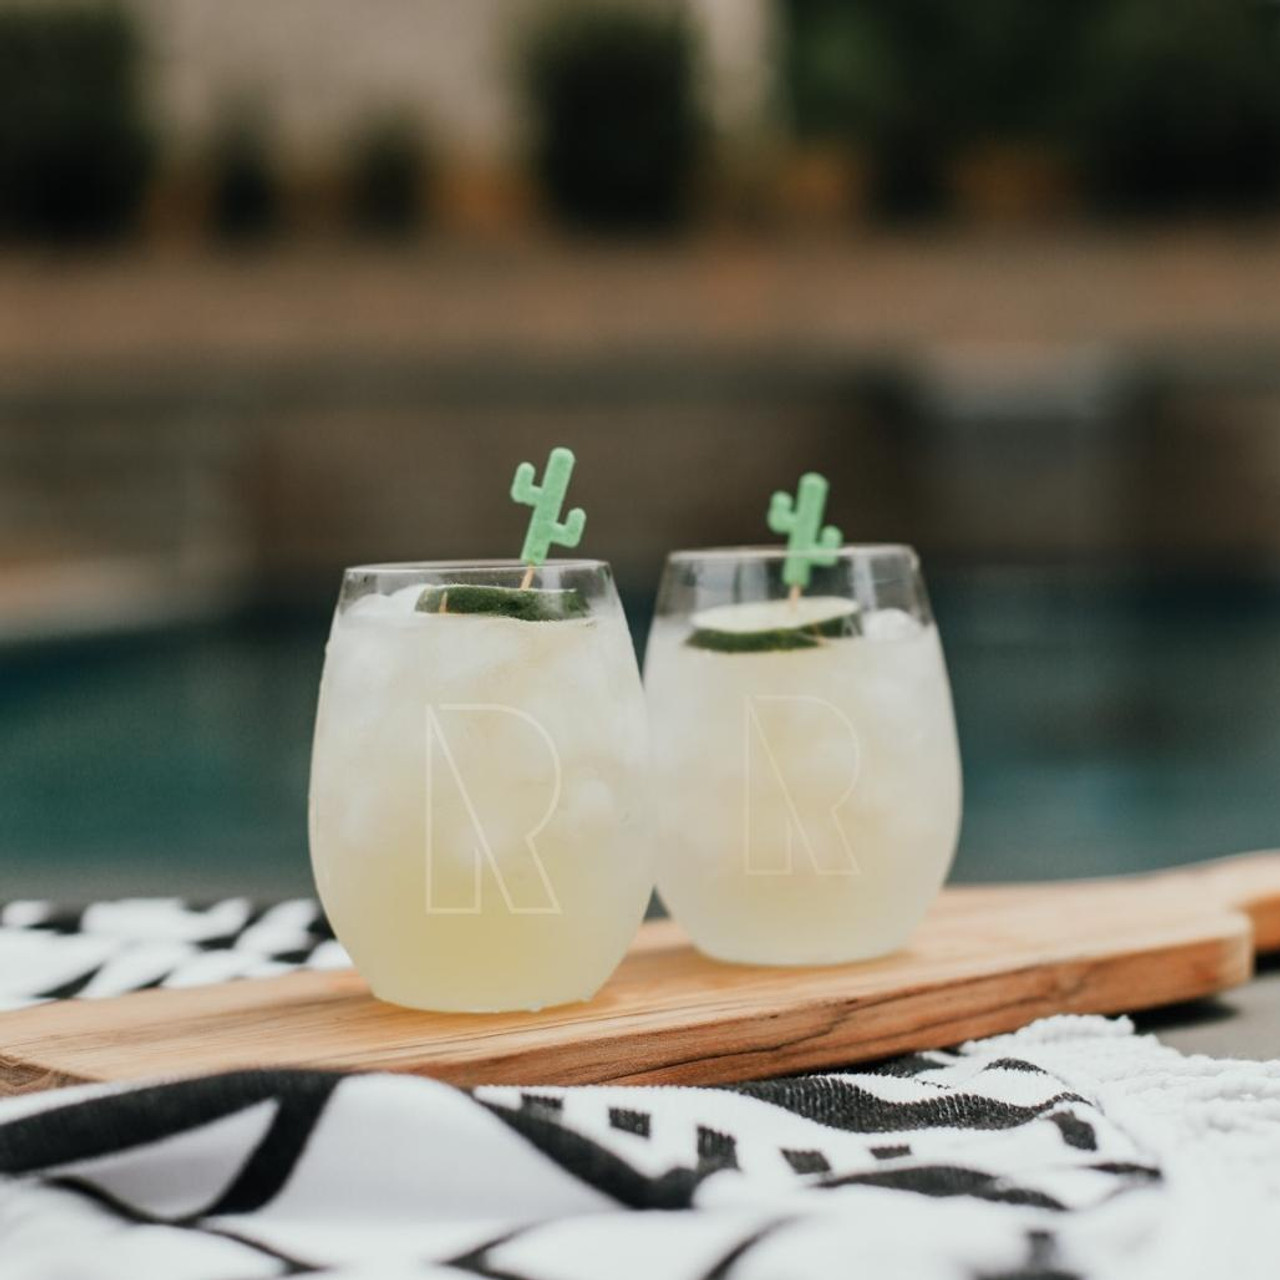 https://cdn11.bigcommerce.com/s-zts5l/images/stencil/1280x1280/products/13086/12094/Stemless_Wine_Glasses_Acrylic_2__08209.1636059678.jpg?c=2